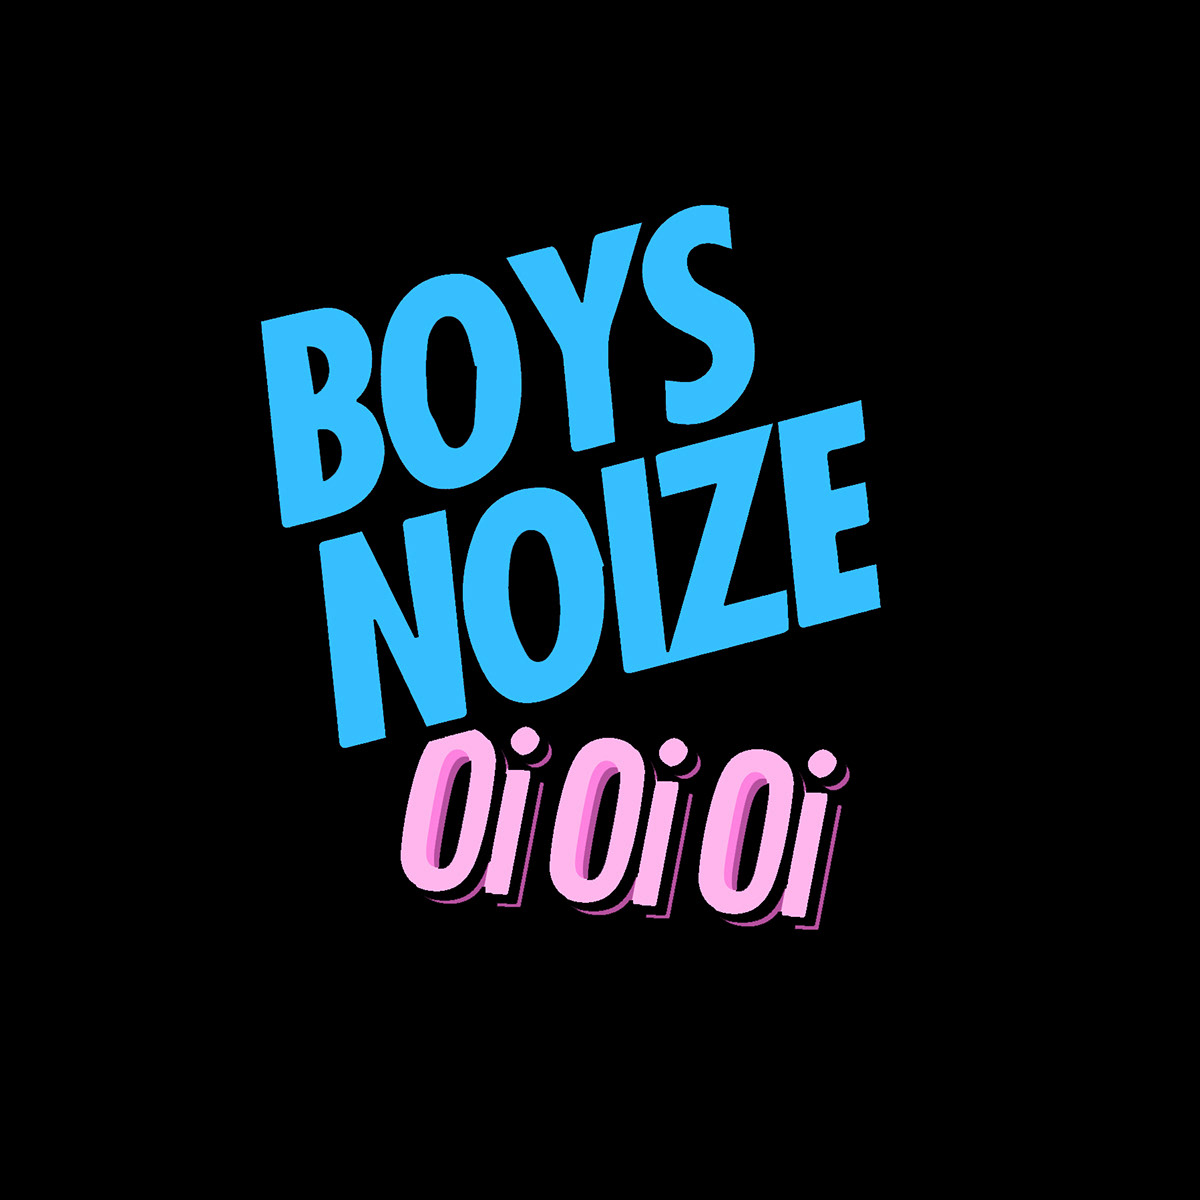 boysnoize cover electronic blue pink poster Album